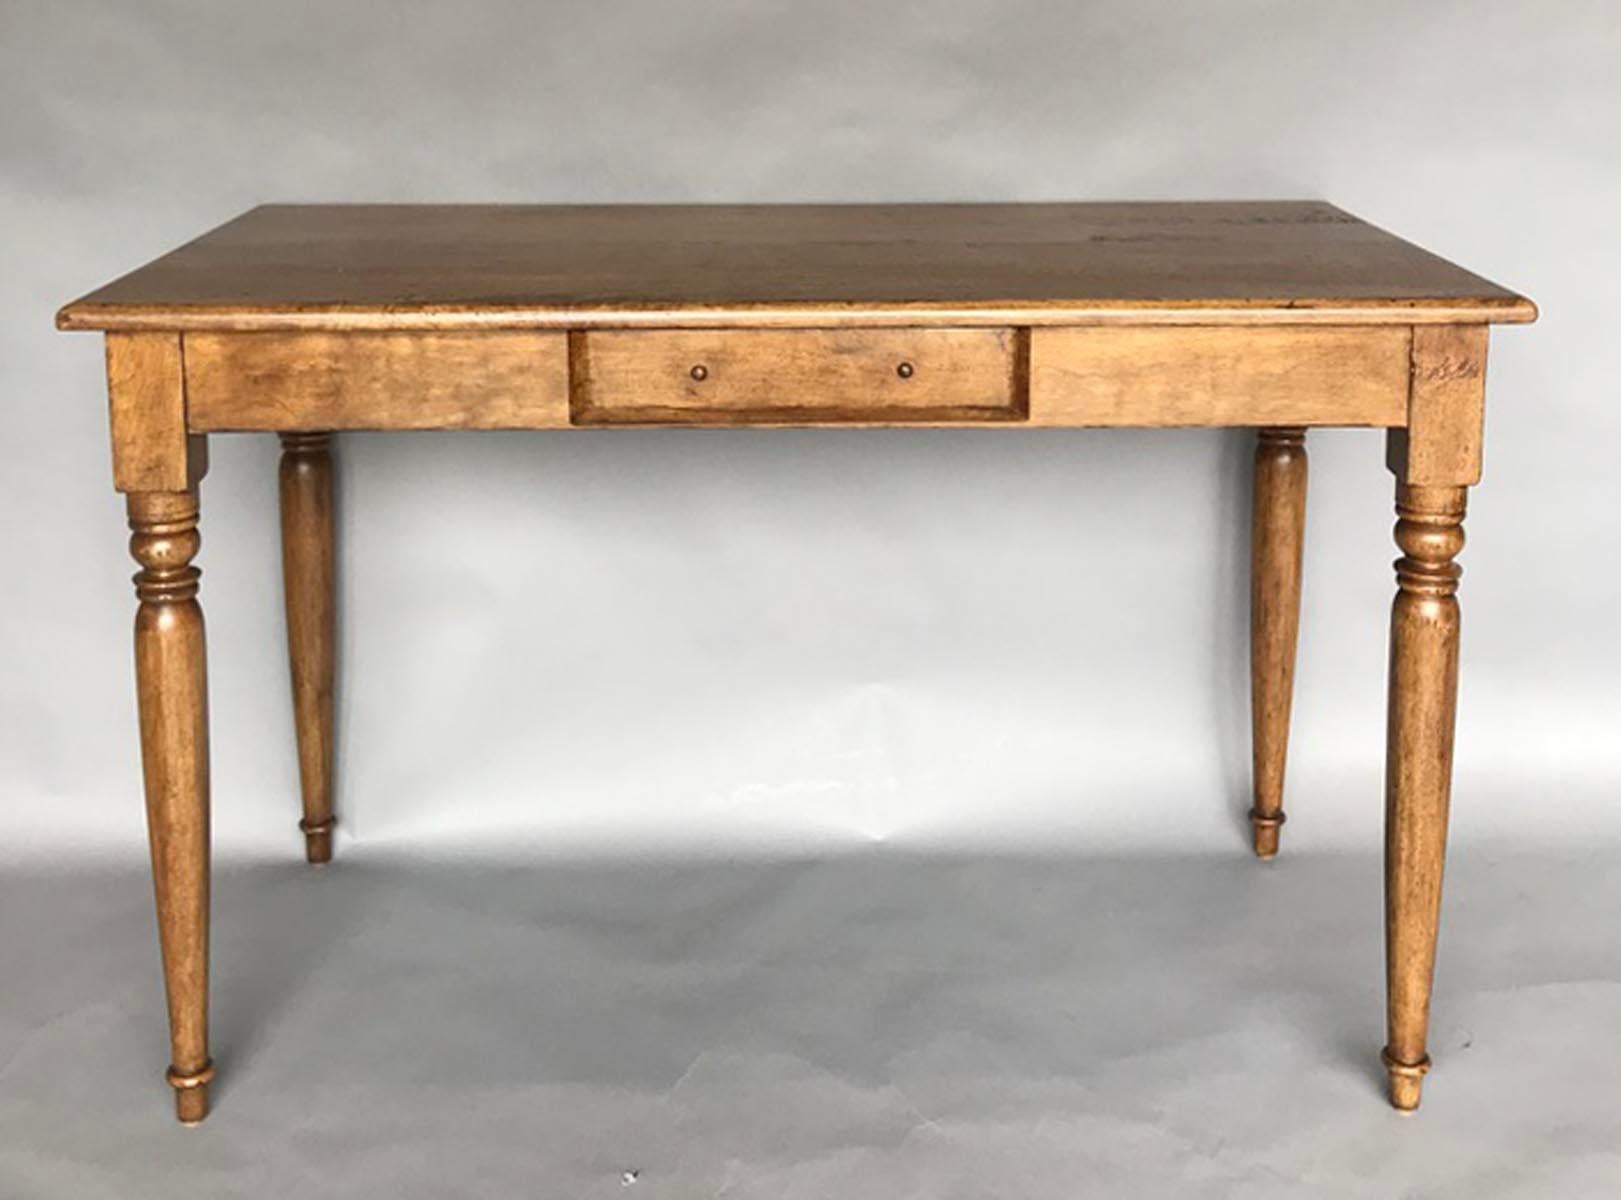 Custom farm house style writing desk with pencil drawer. Can be made in any size and finish. As shown here in a light walnut with light to medium distress. 26 inches clearance from floor to apron on a 30 inch tall table. Also a great design for a